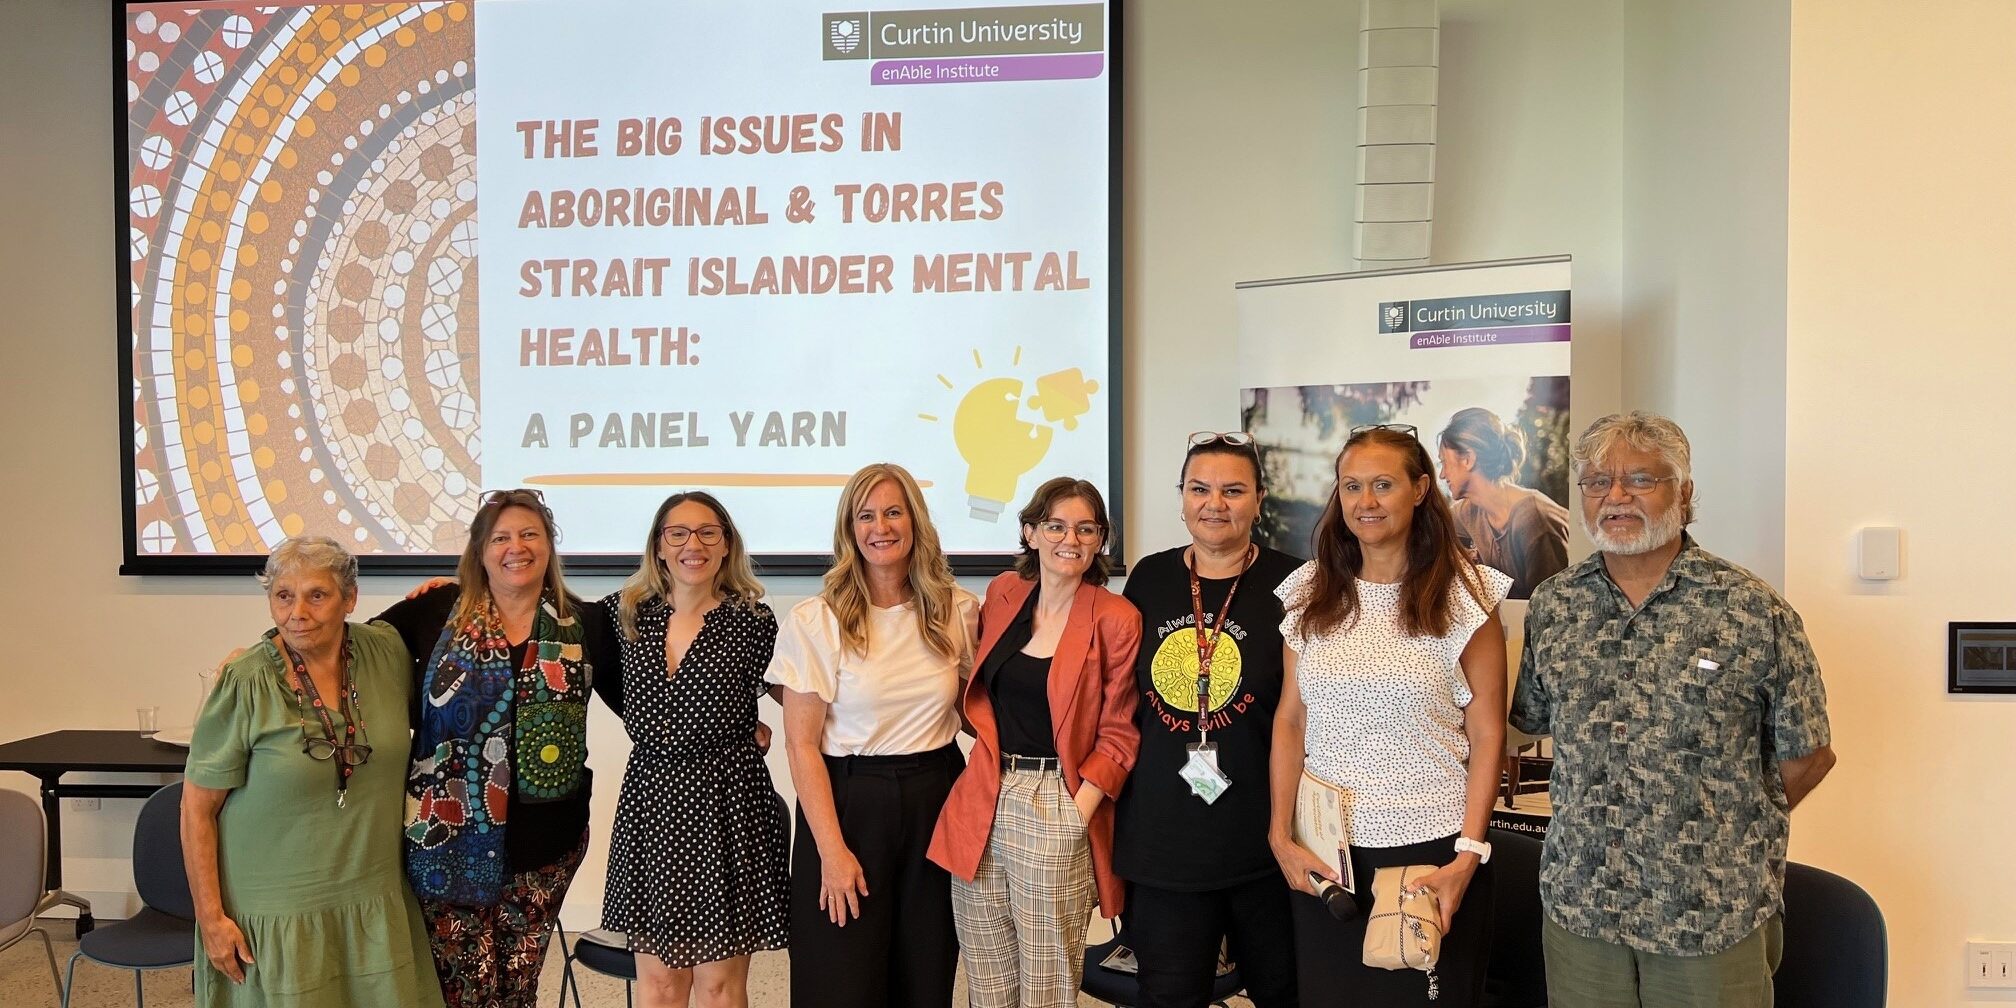 The Big Issues in Aboriginal and Torres Strait Islander Mental Health: A Panel Yarn